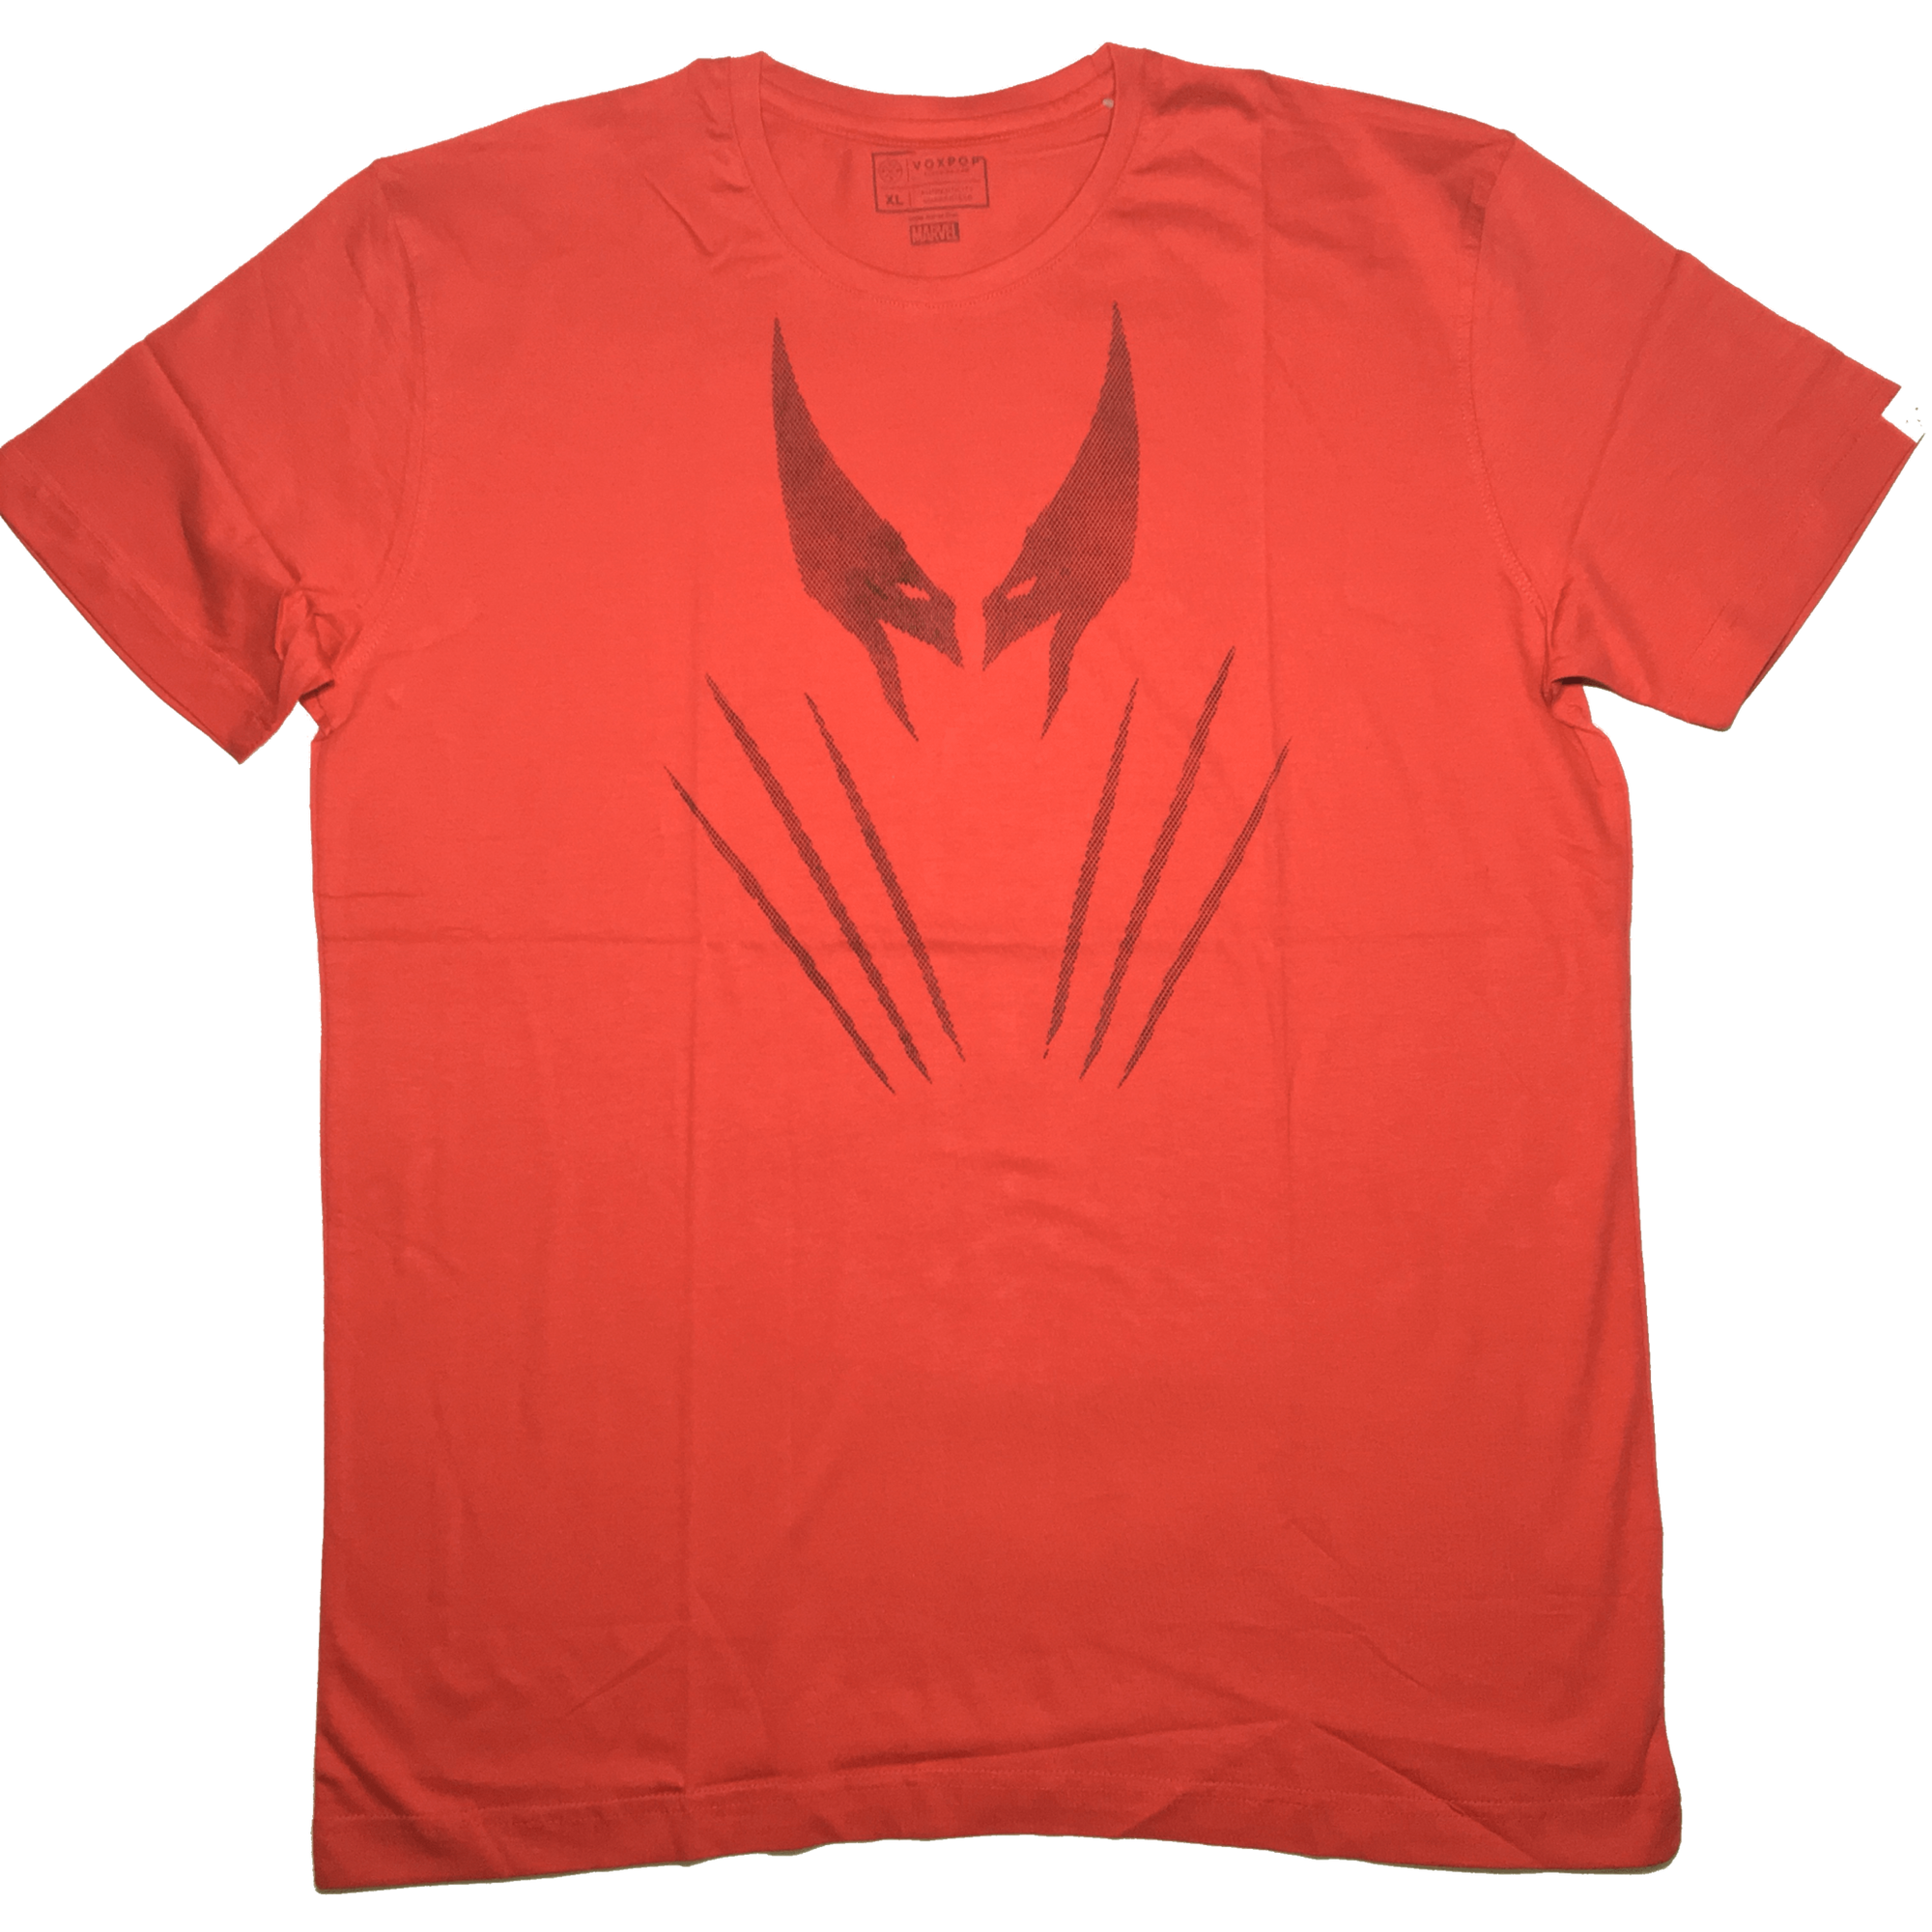 Wolverine Red T-Shirt by Vox Pop Clothing -Vox Pop Clothing - India - www.superherotoystore.com